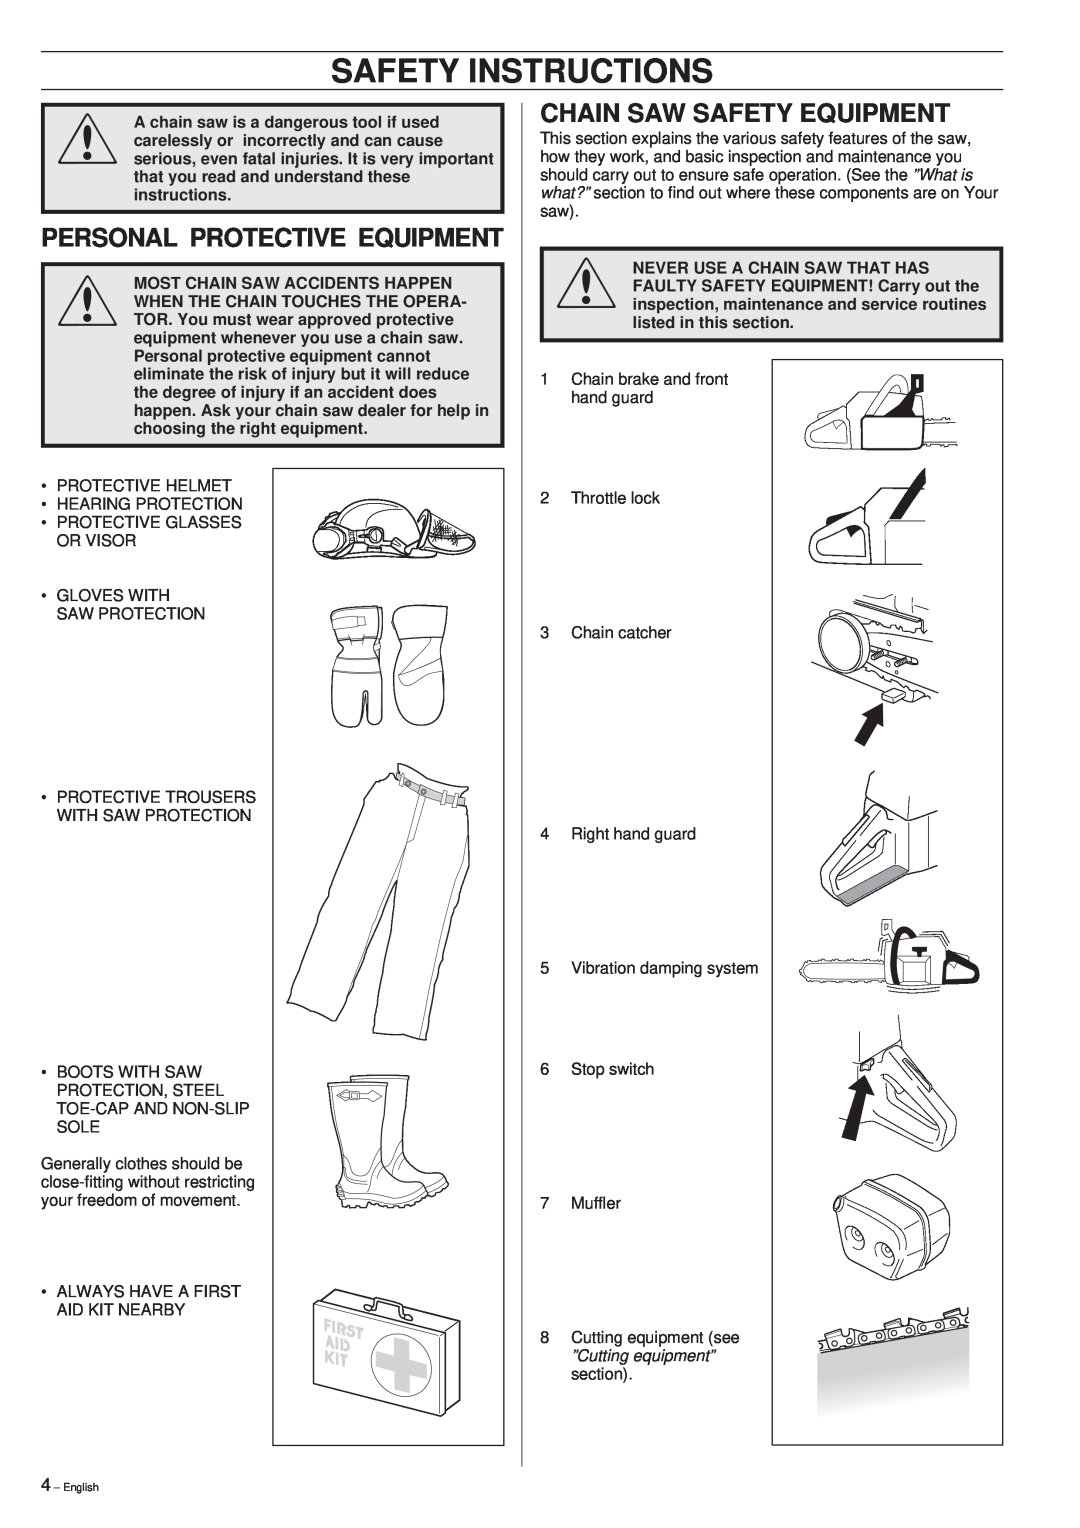 Husqvarna 261 manual Safety Instructions, Personal Protective Equipment, Chain Saw Safety Equipment 